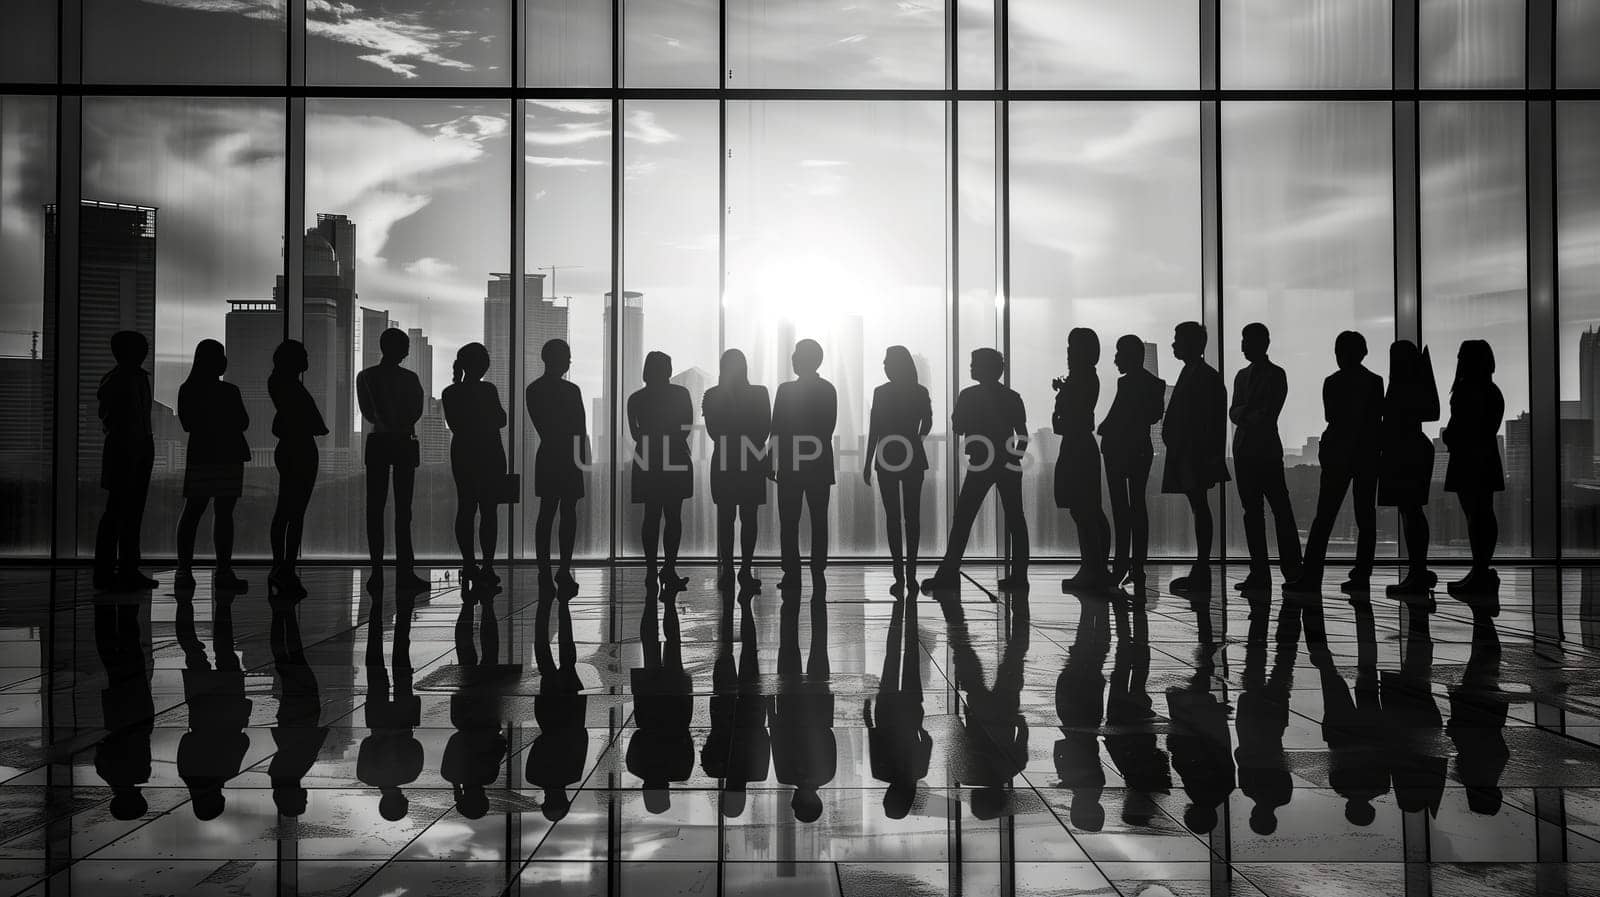 A diverse group of individuals are standing together in front of a large window, looking outwards. They appear engaged and focused, possibly discussing a business concept or enjoying the view.